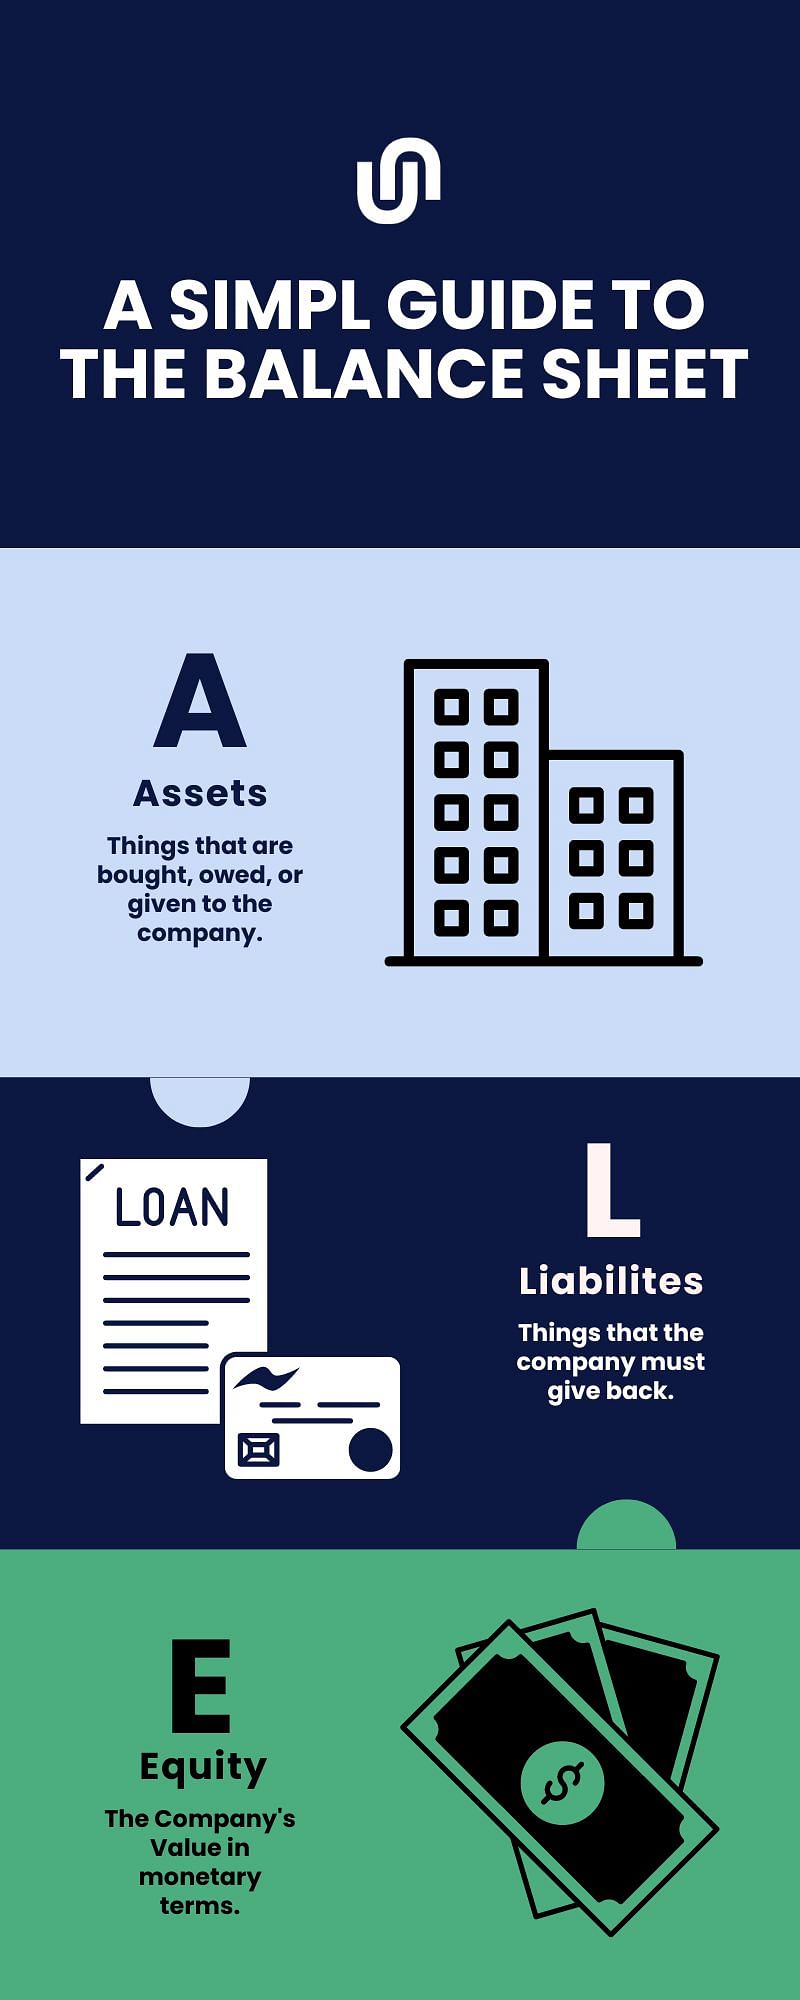 An infographic explaining in brief what assets, liabilities, and equity.